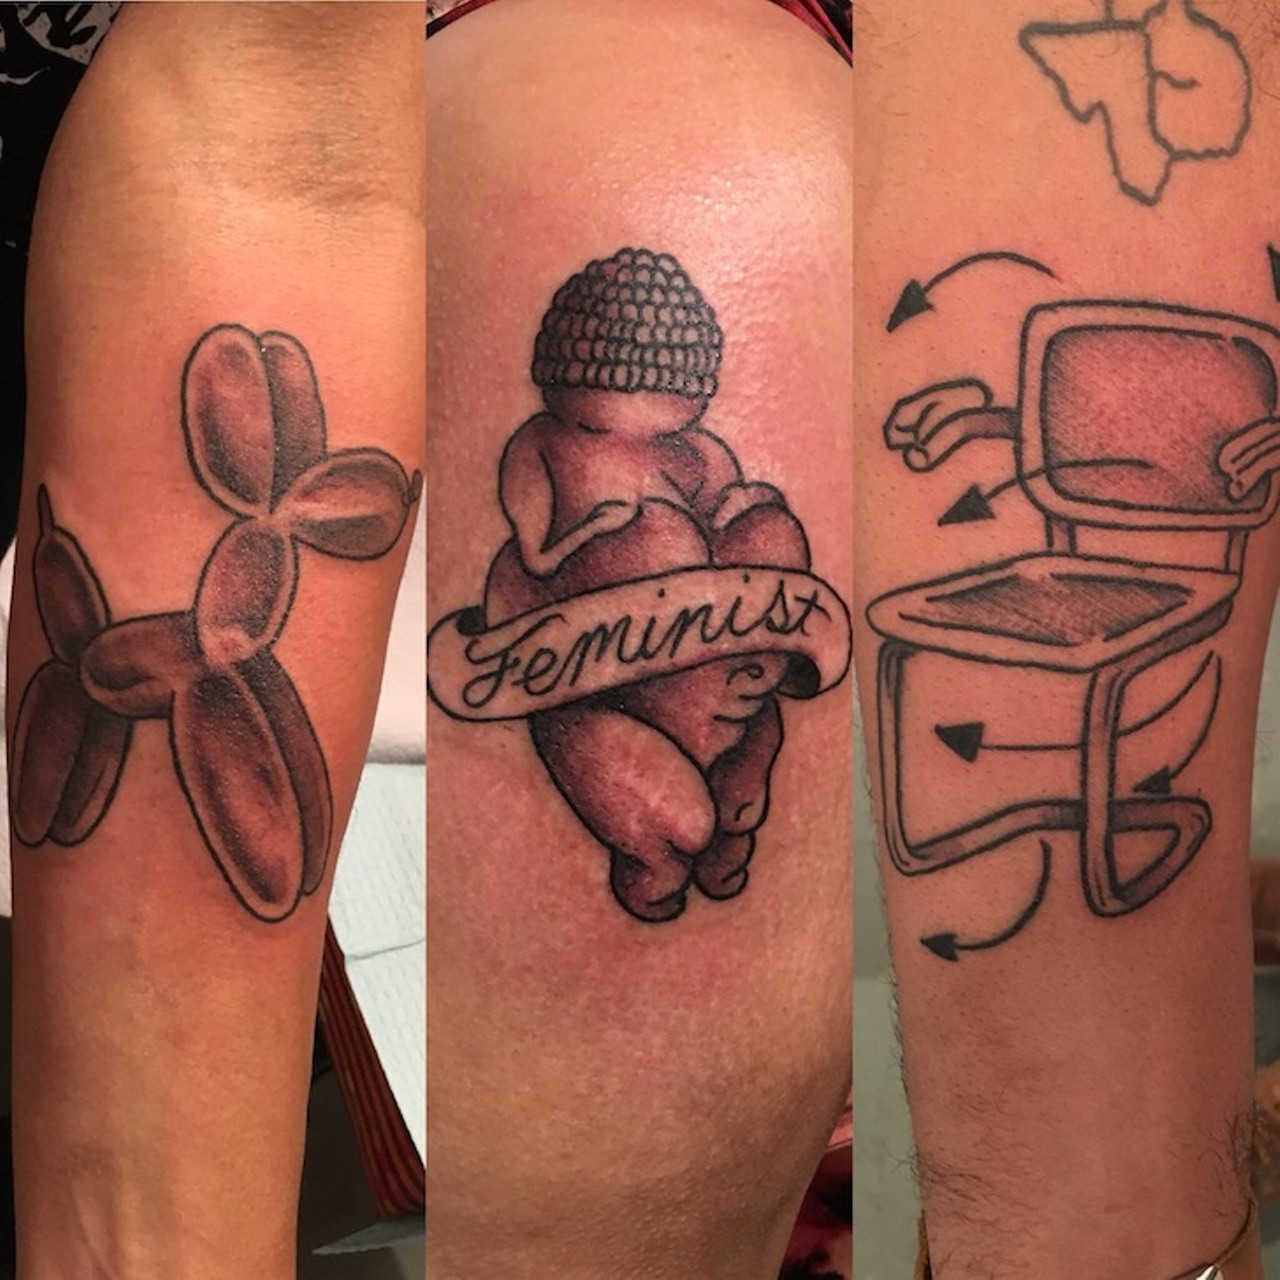 Three tattoos inked in conjunction with “Skin in the Game: Act 2”